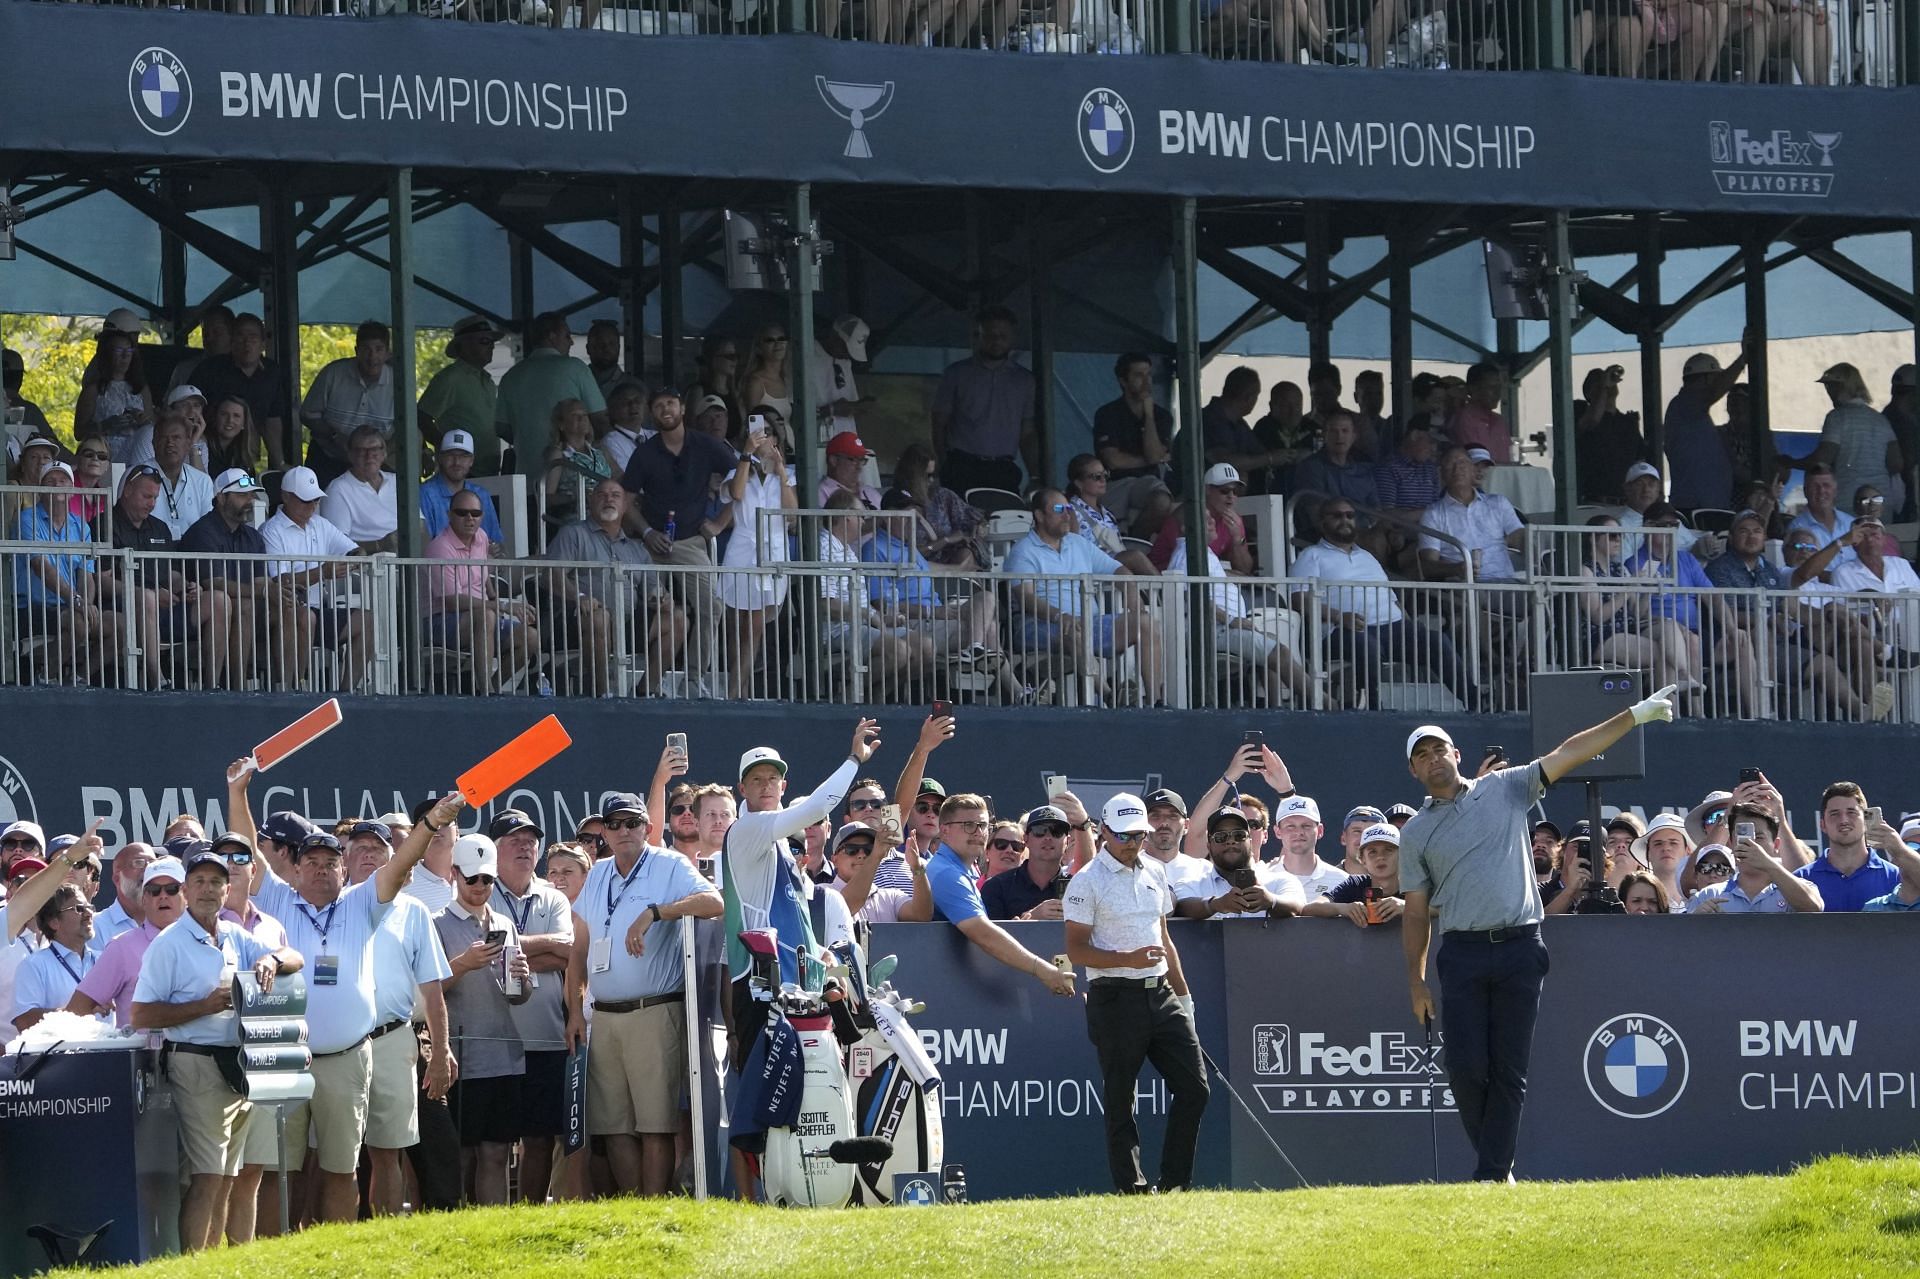 BMW Championship purse breakdown How much will each golfer earn from the $20,000,000 prize money?